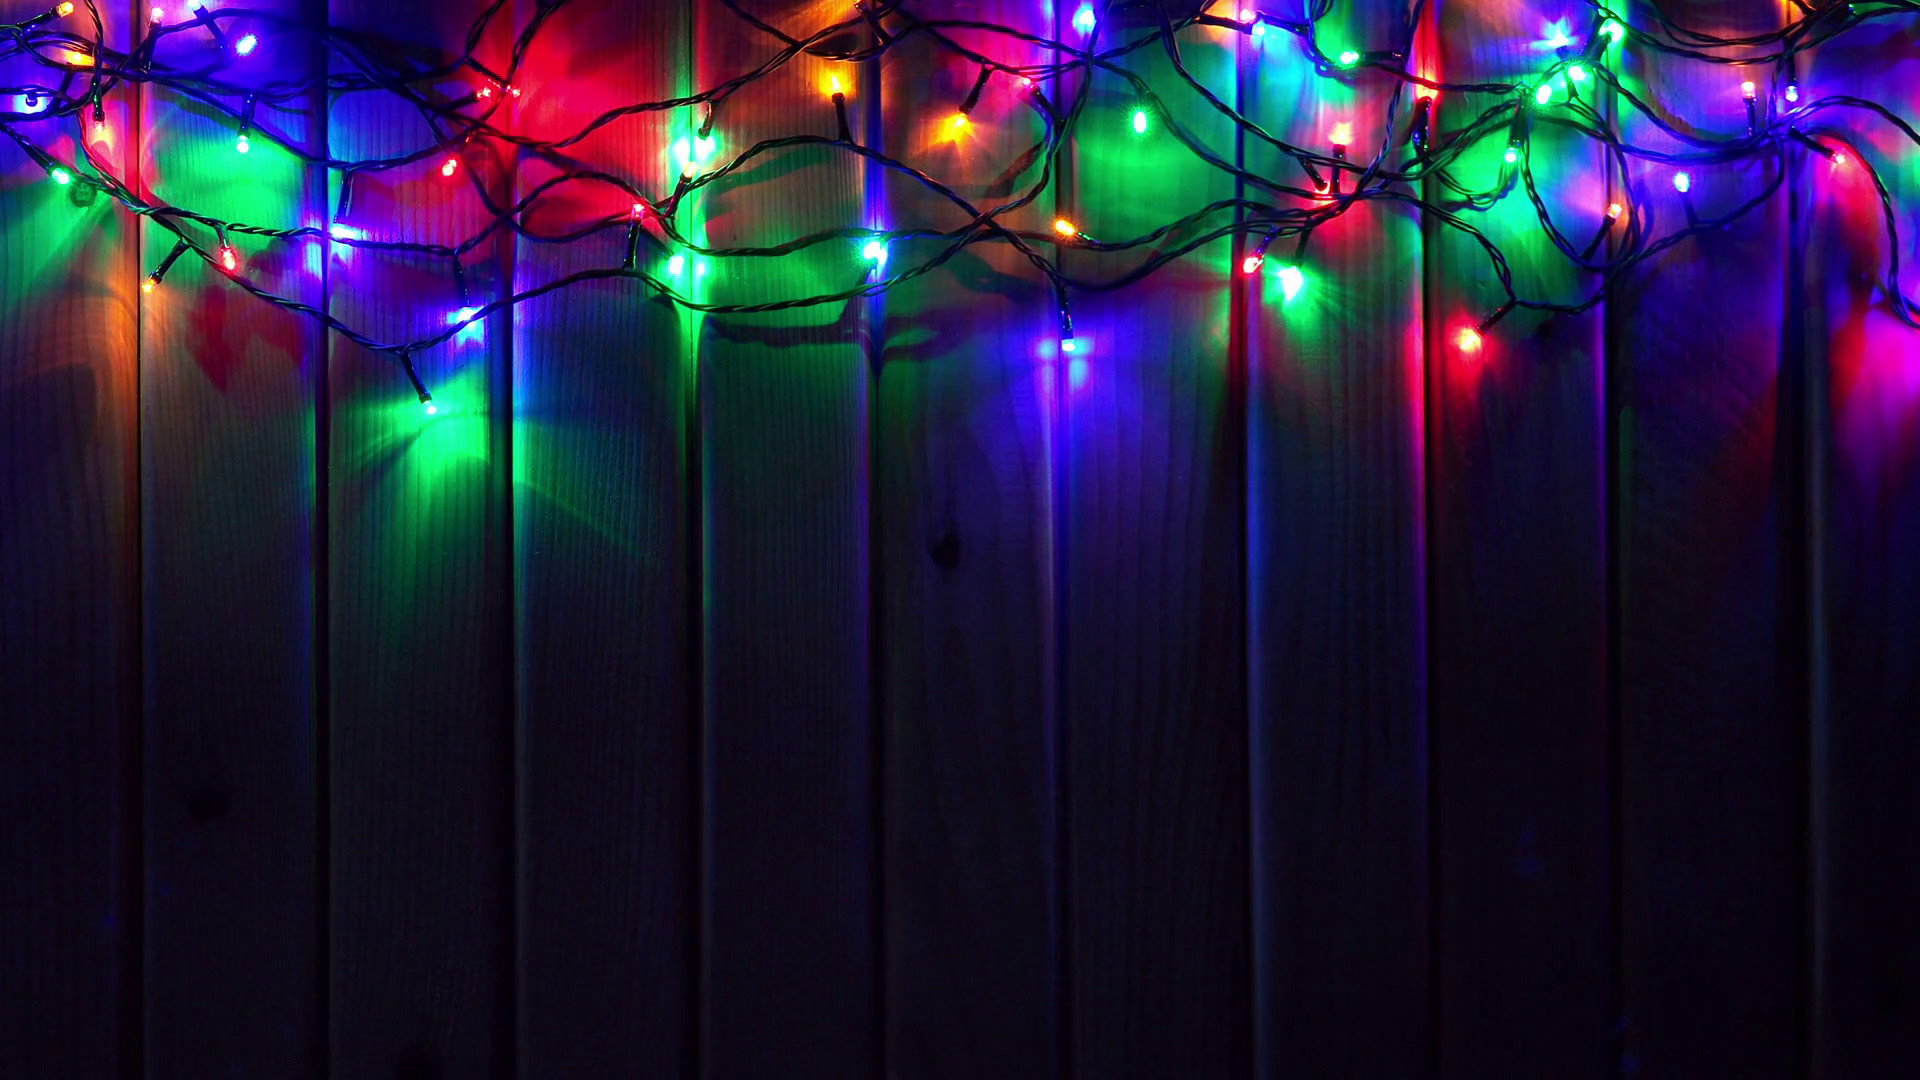 1920x1080 LED Colorful Christmas Lights on Wooden Background with place for Your  Text. 4K Ultra HD 3840x2160 Video Clip Stock Video Footage - Storyblocks  Video